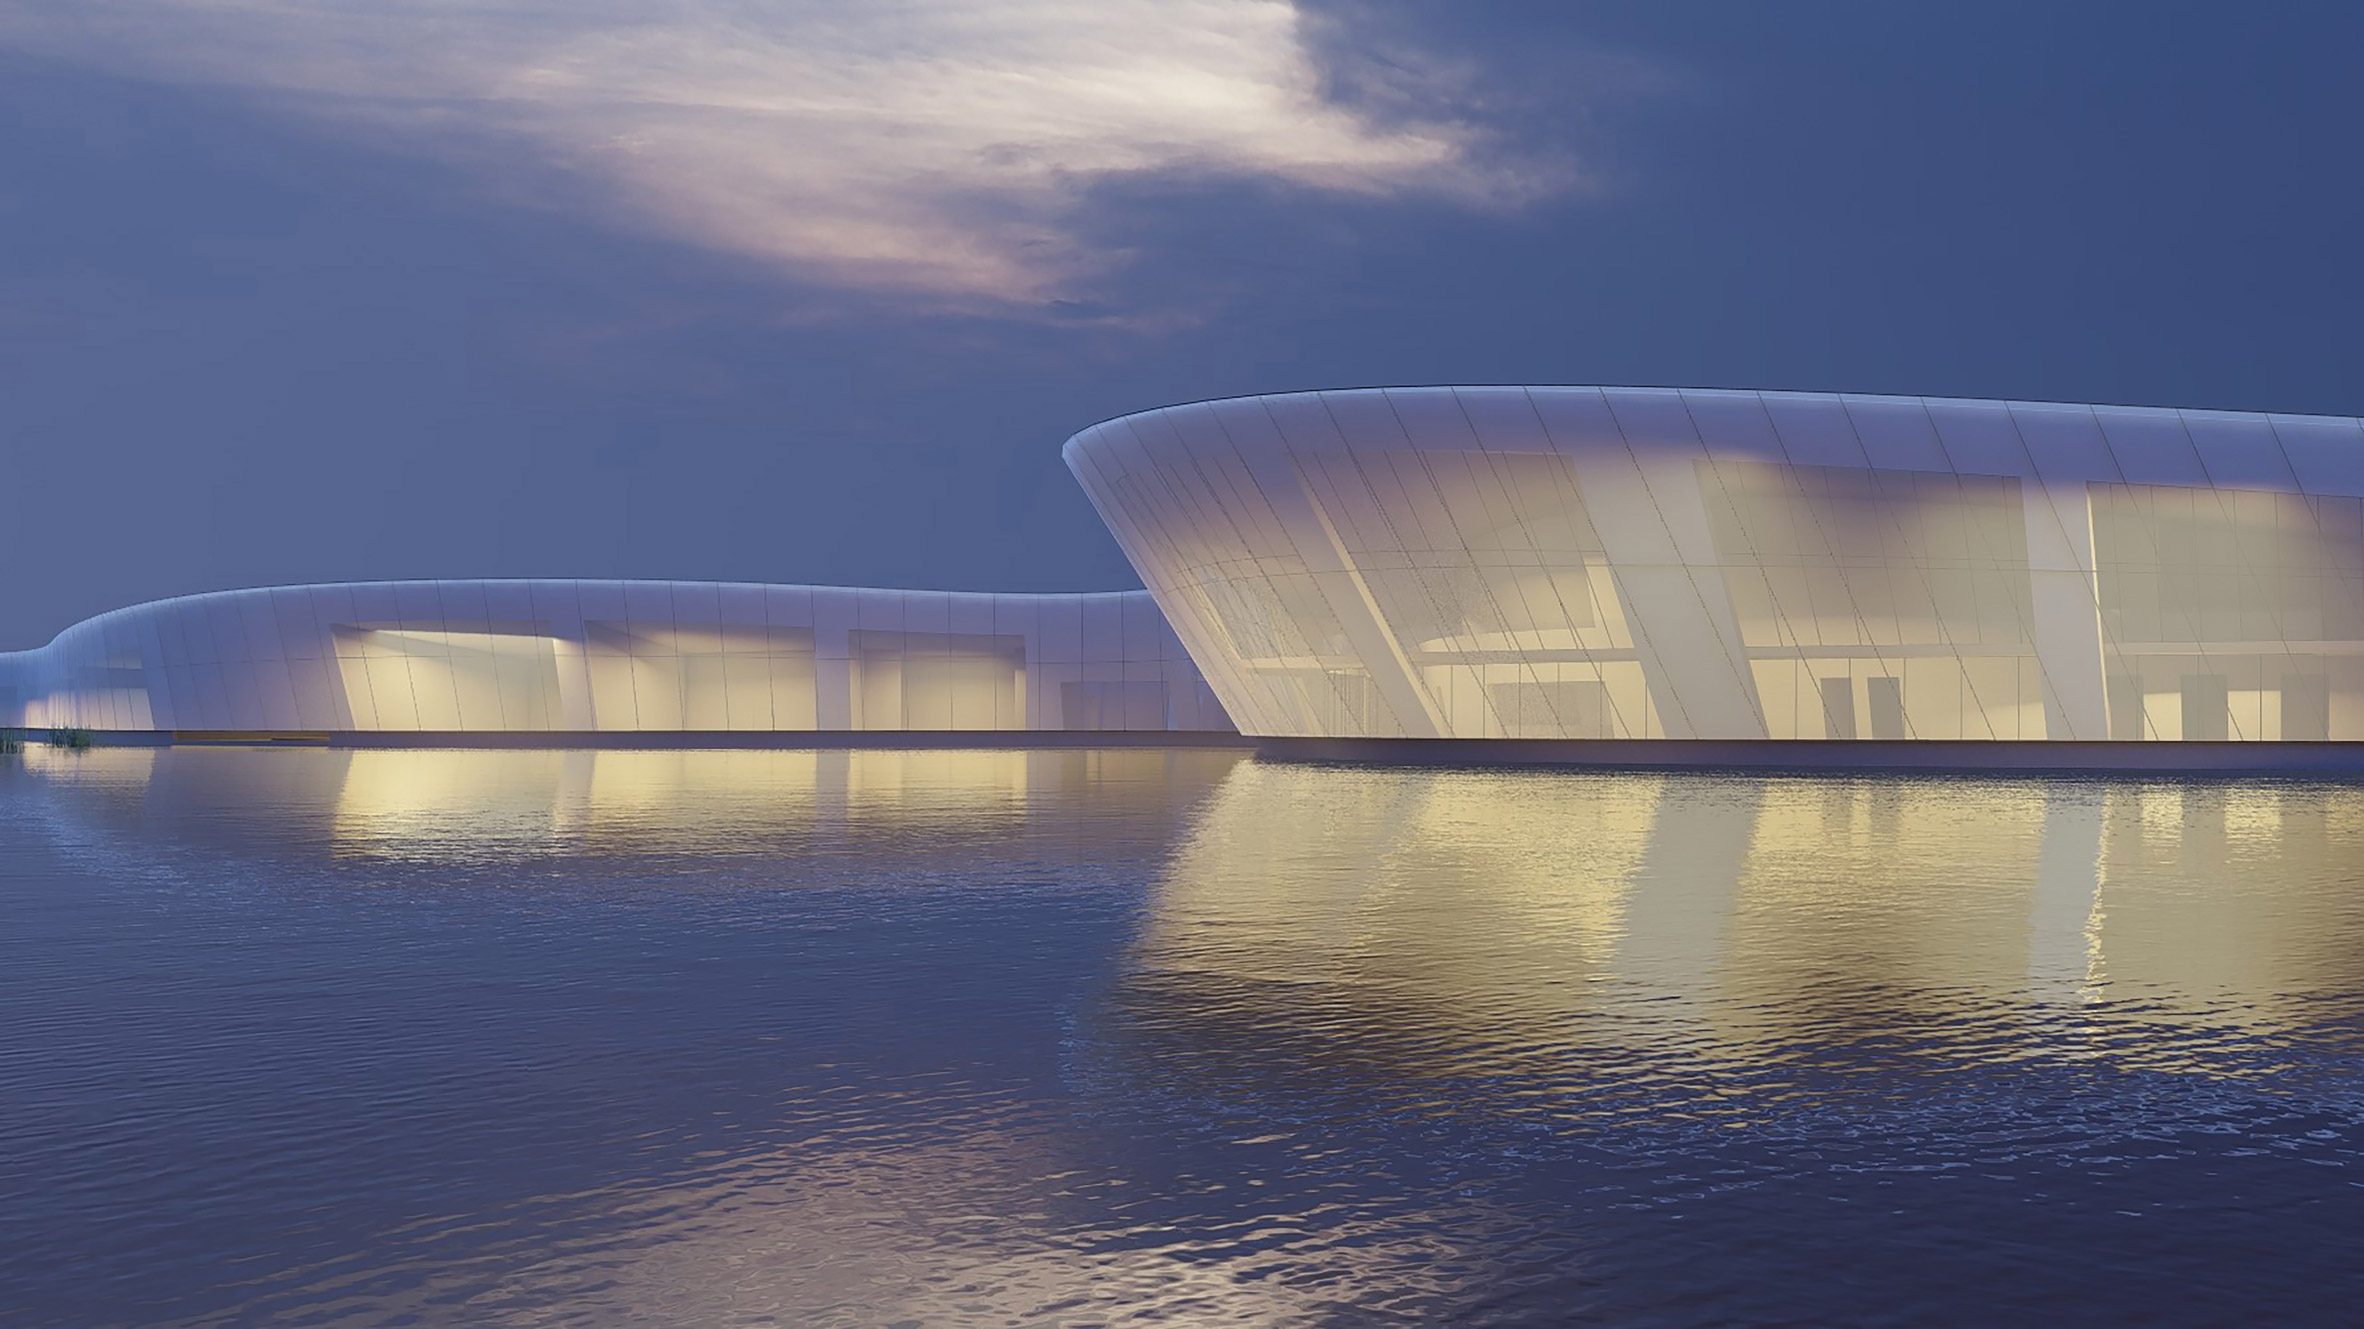 Visualisation of a wellness facility on water